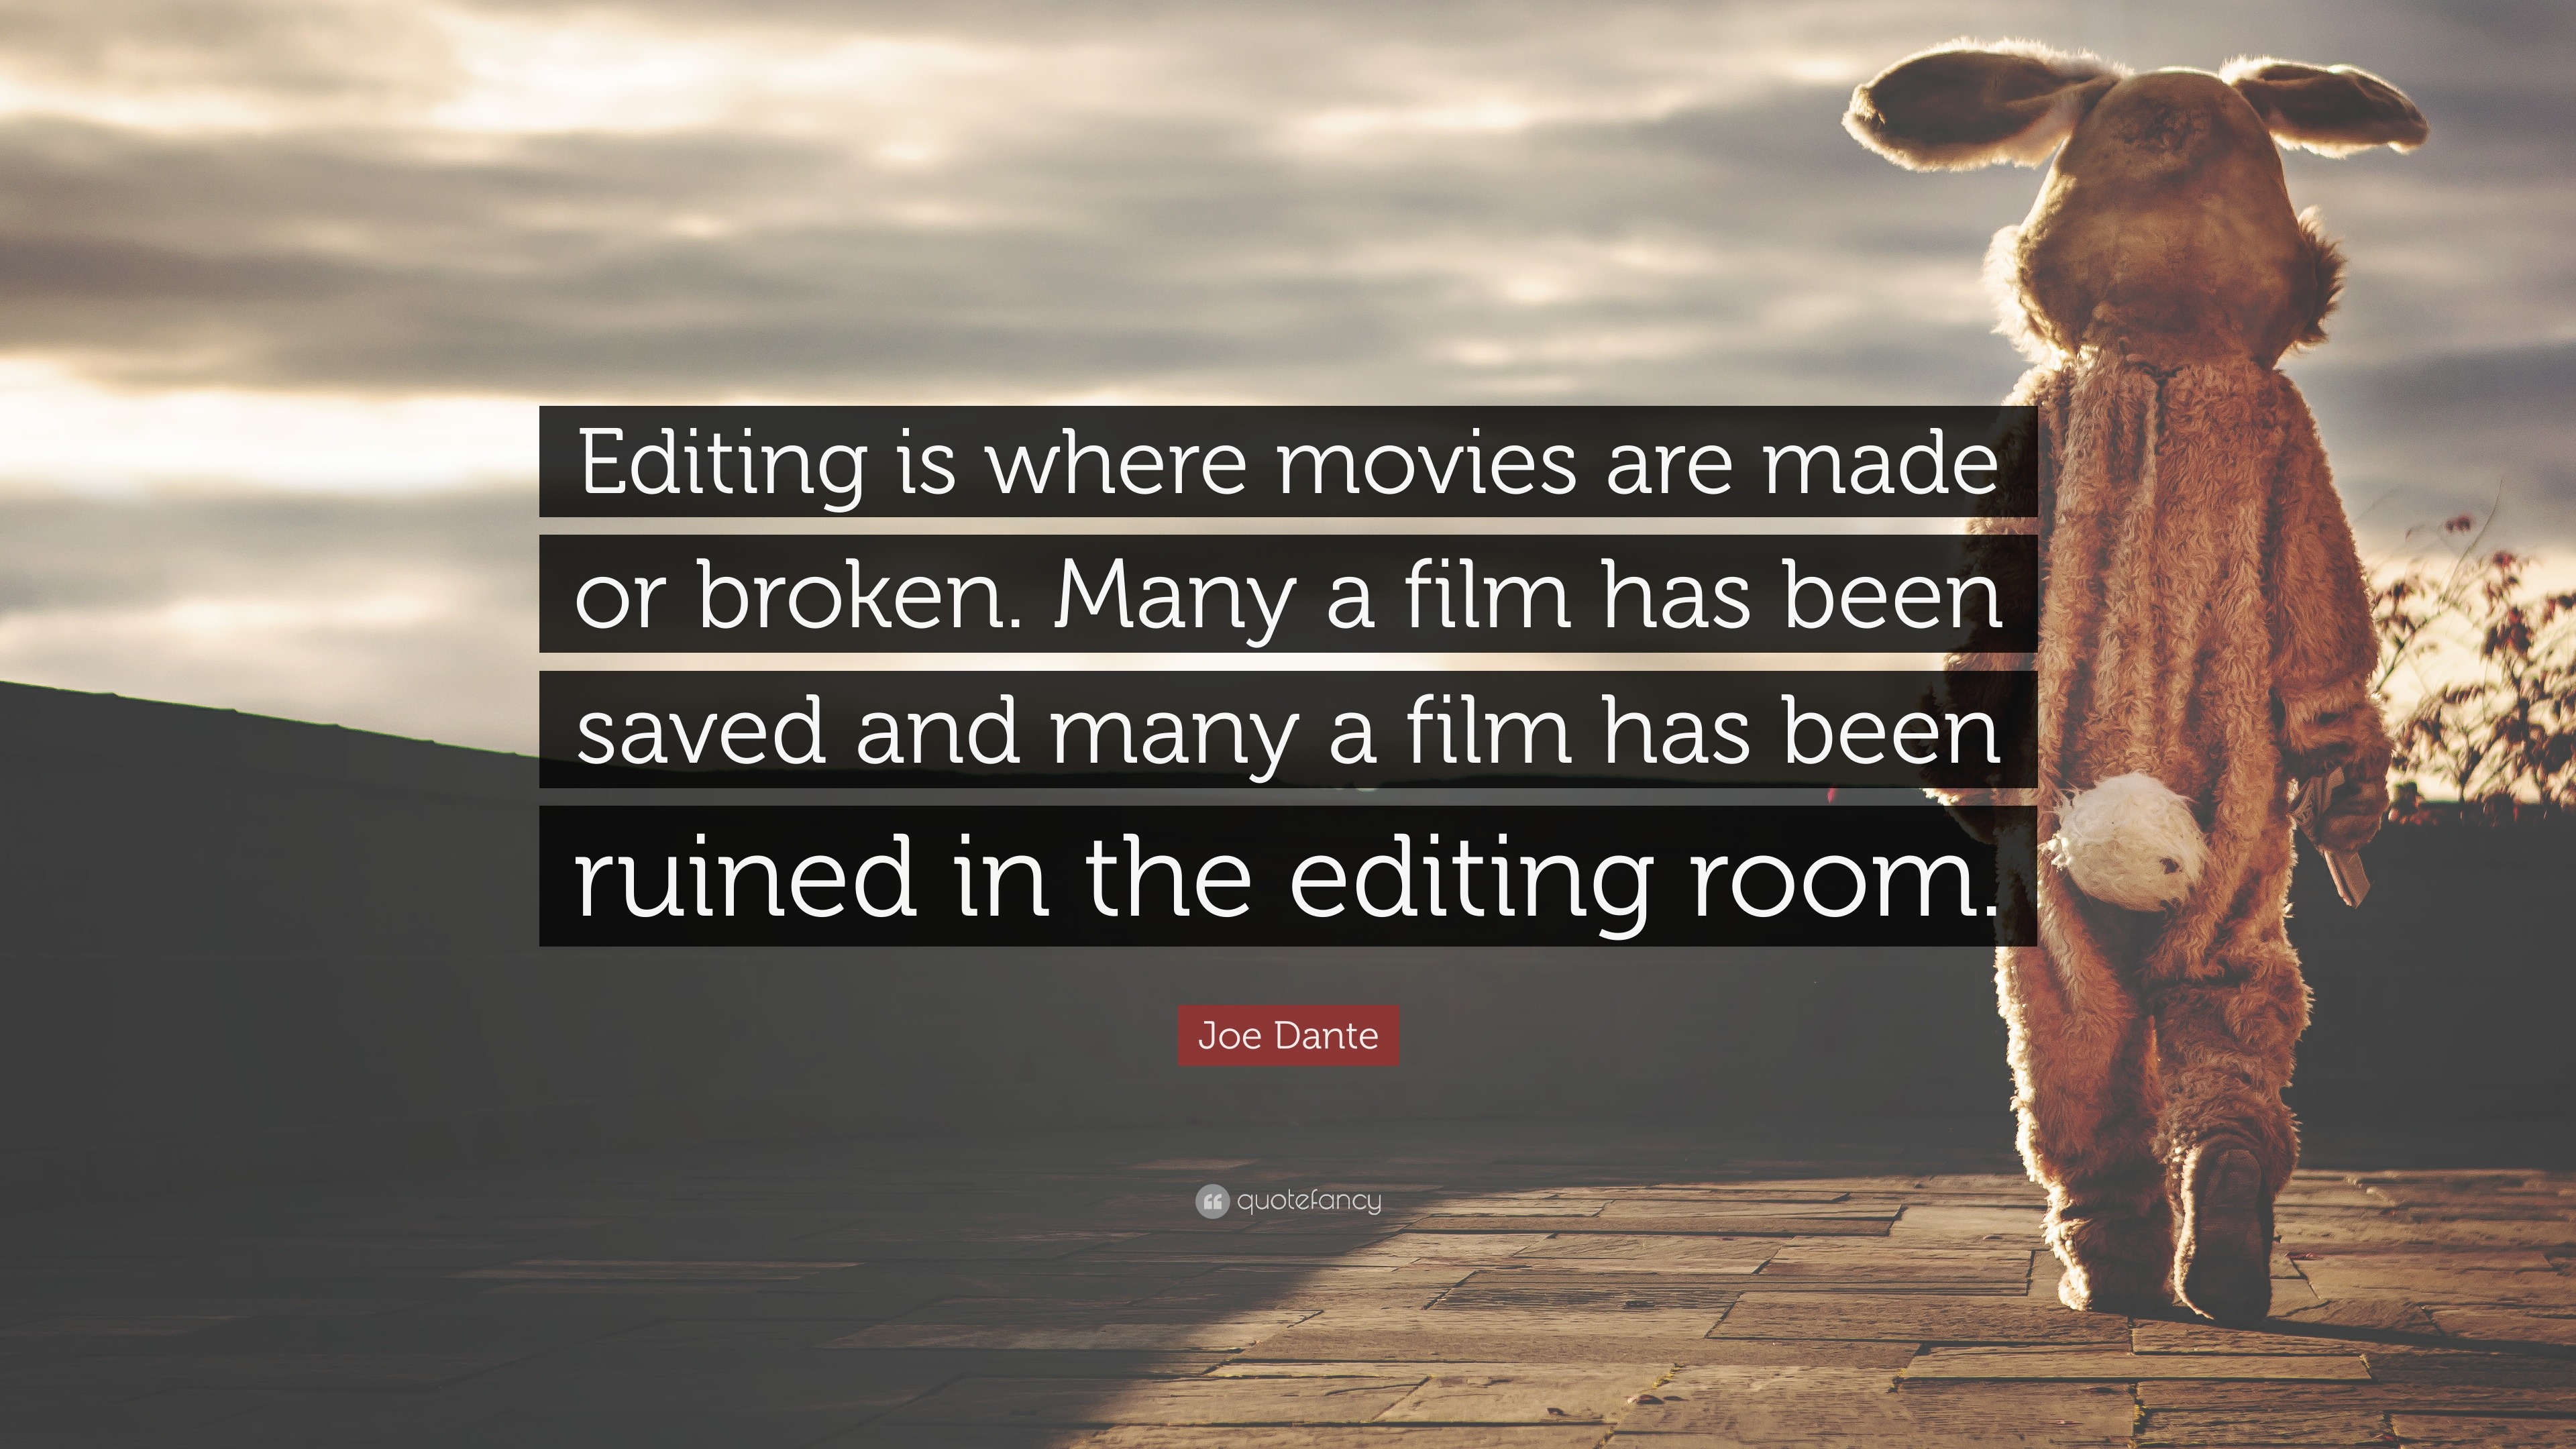 Joe Dante Quote: “Editing is where movies are made or broken. Many a